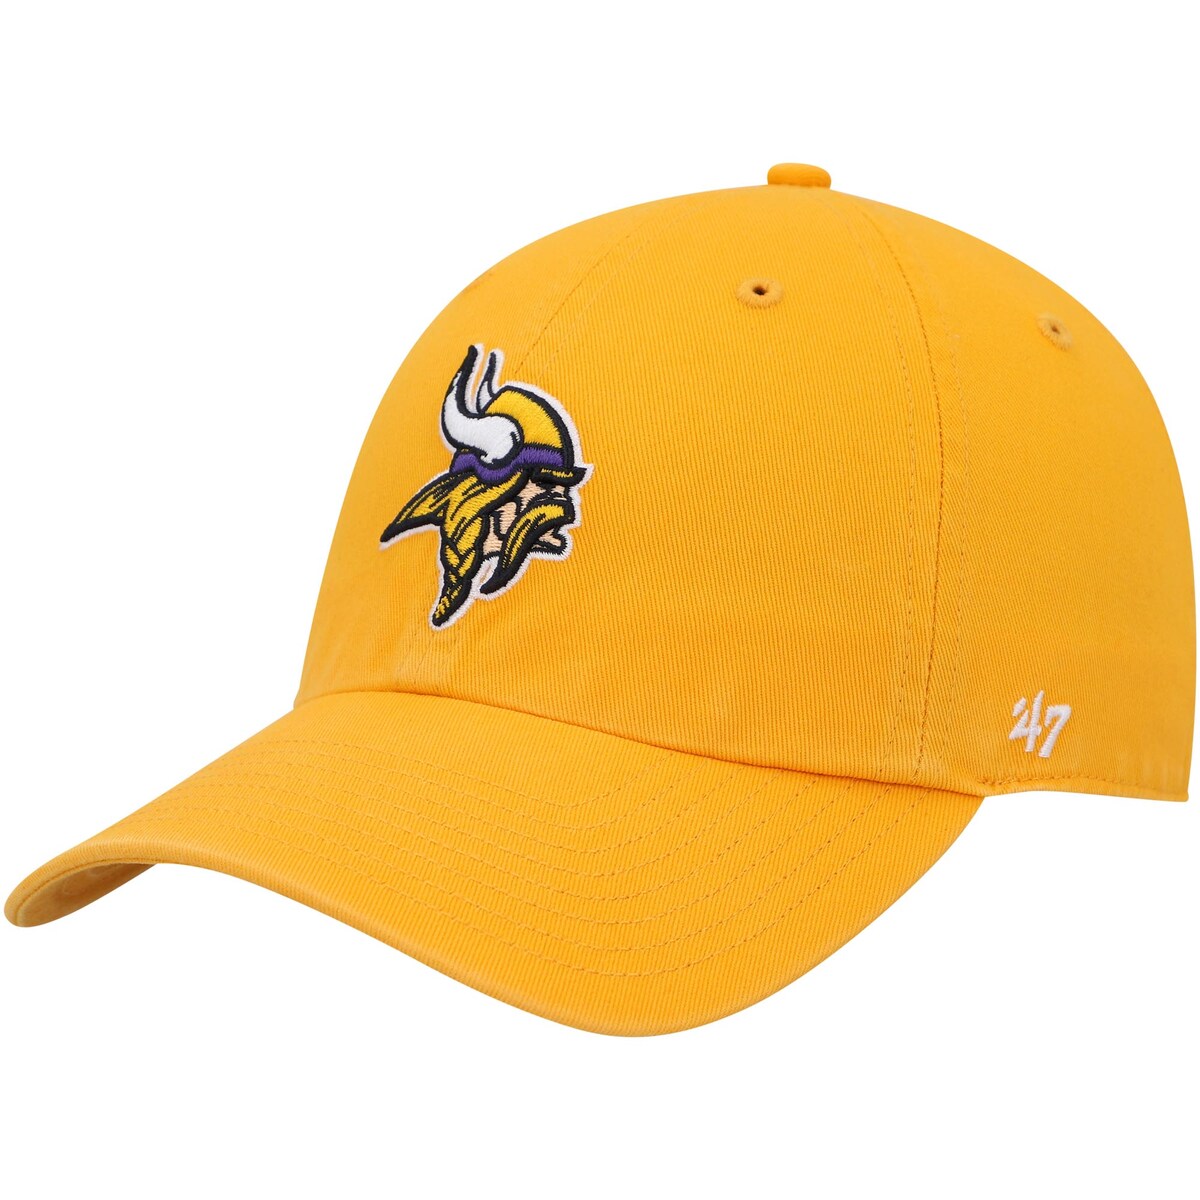 Stay committed to the Minnesota Vikings by wearing this Clean Up Alternate adjustable hat from '47. The unstructured, relaxed design of this cap acts as the perfect canvas for the bold Minnesota Vikings graphics embroidered on the crown. You'll love sporting this piece of headwear on game day.Clip tagUnstructured relaxed fitOne size fits mostSix panels with eyeletsMaterial: 100% CottonOfficially licensedLow crownCurved billBrand: '47Adjustable fabric strap with snap buttonEmbroidered graphics with raised detailsImportedSurface washable